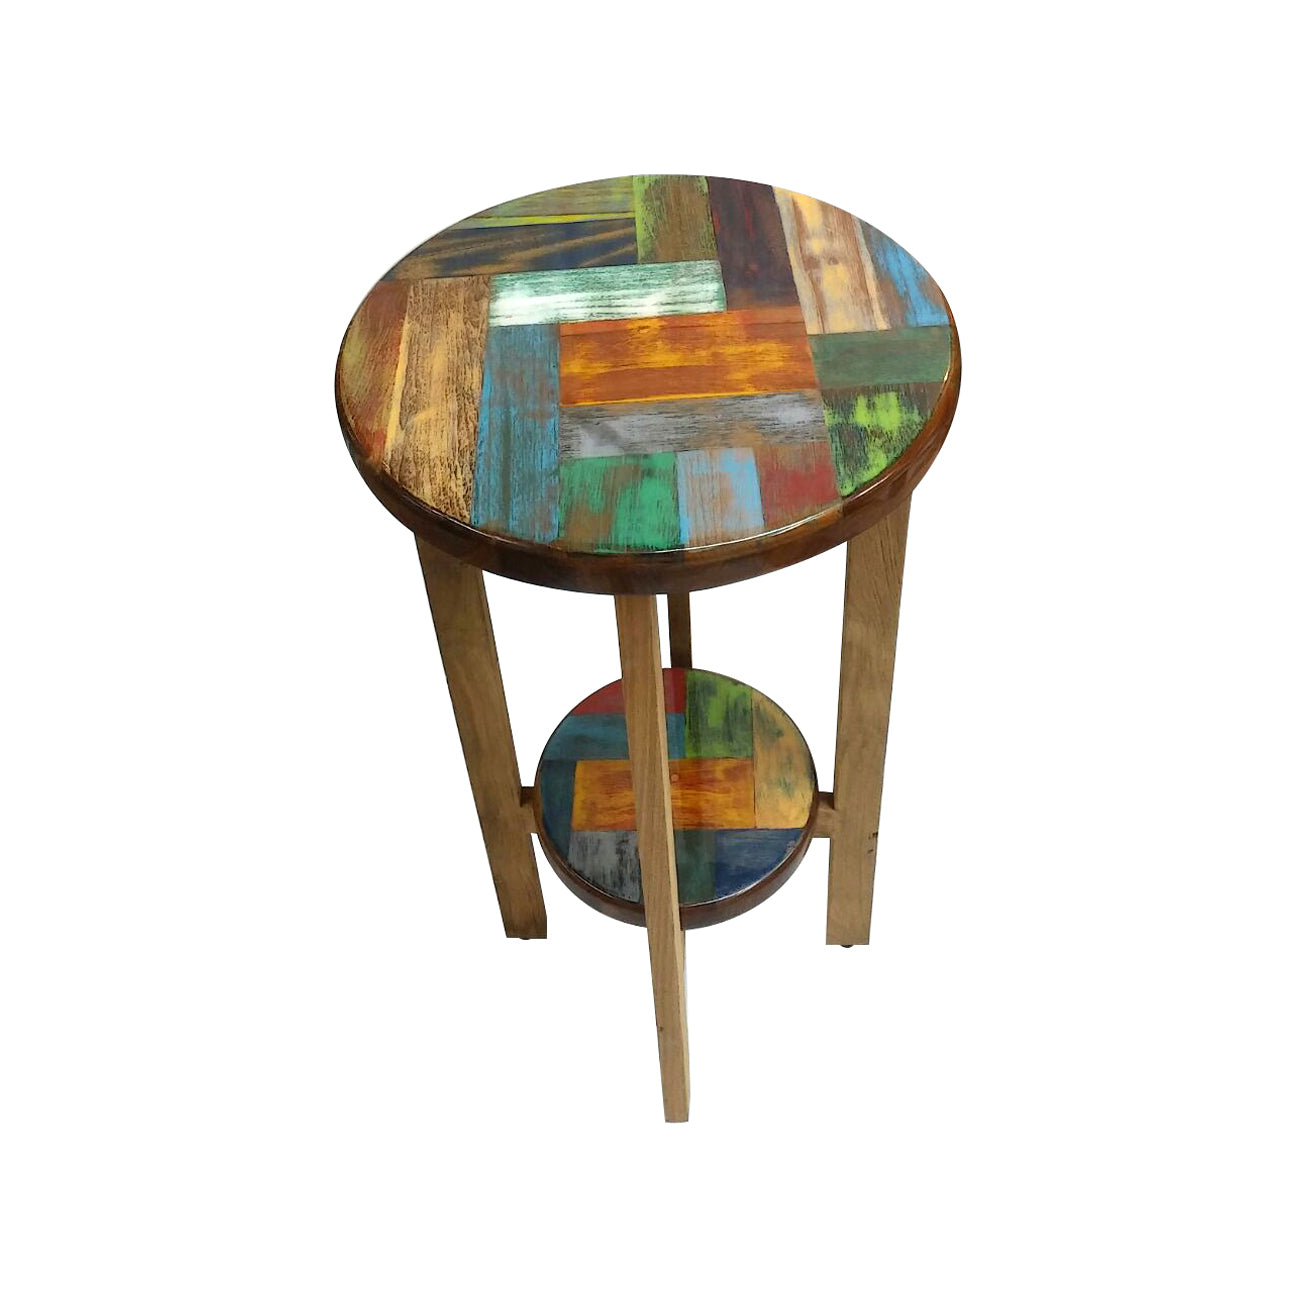 Mosaic tall side table